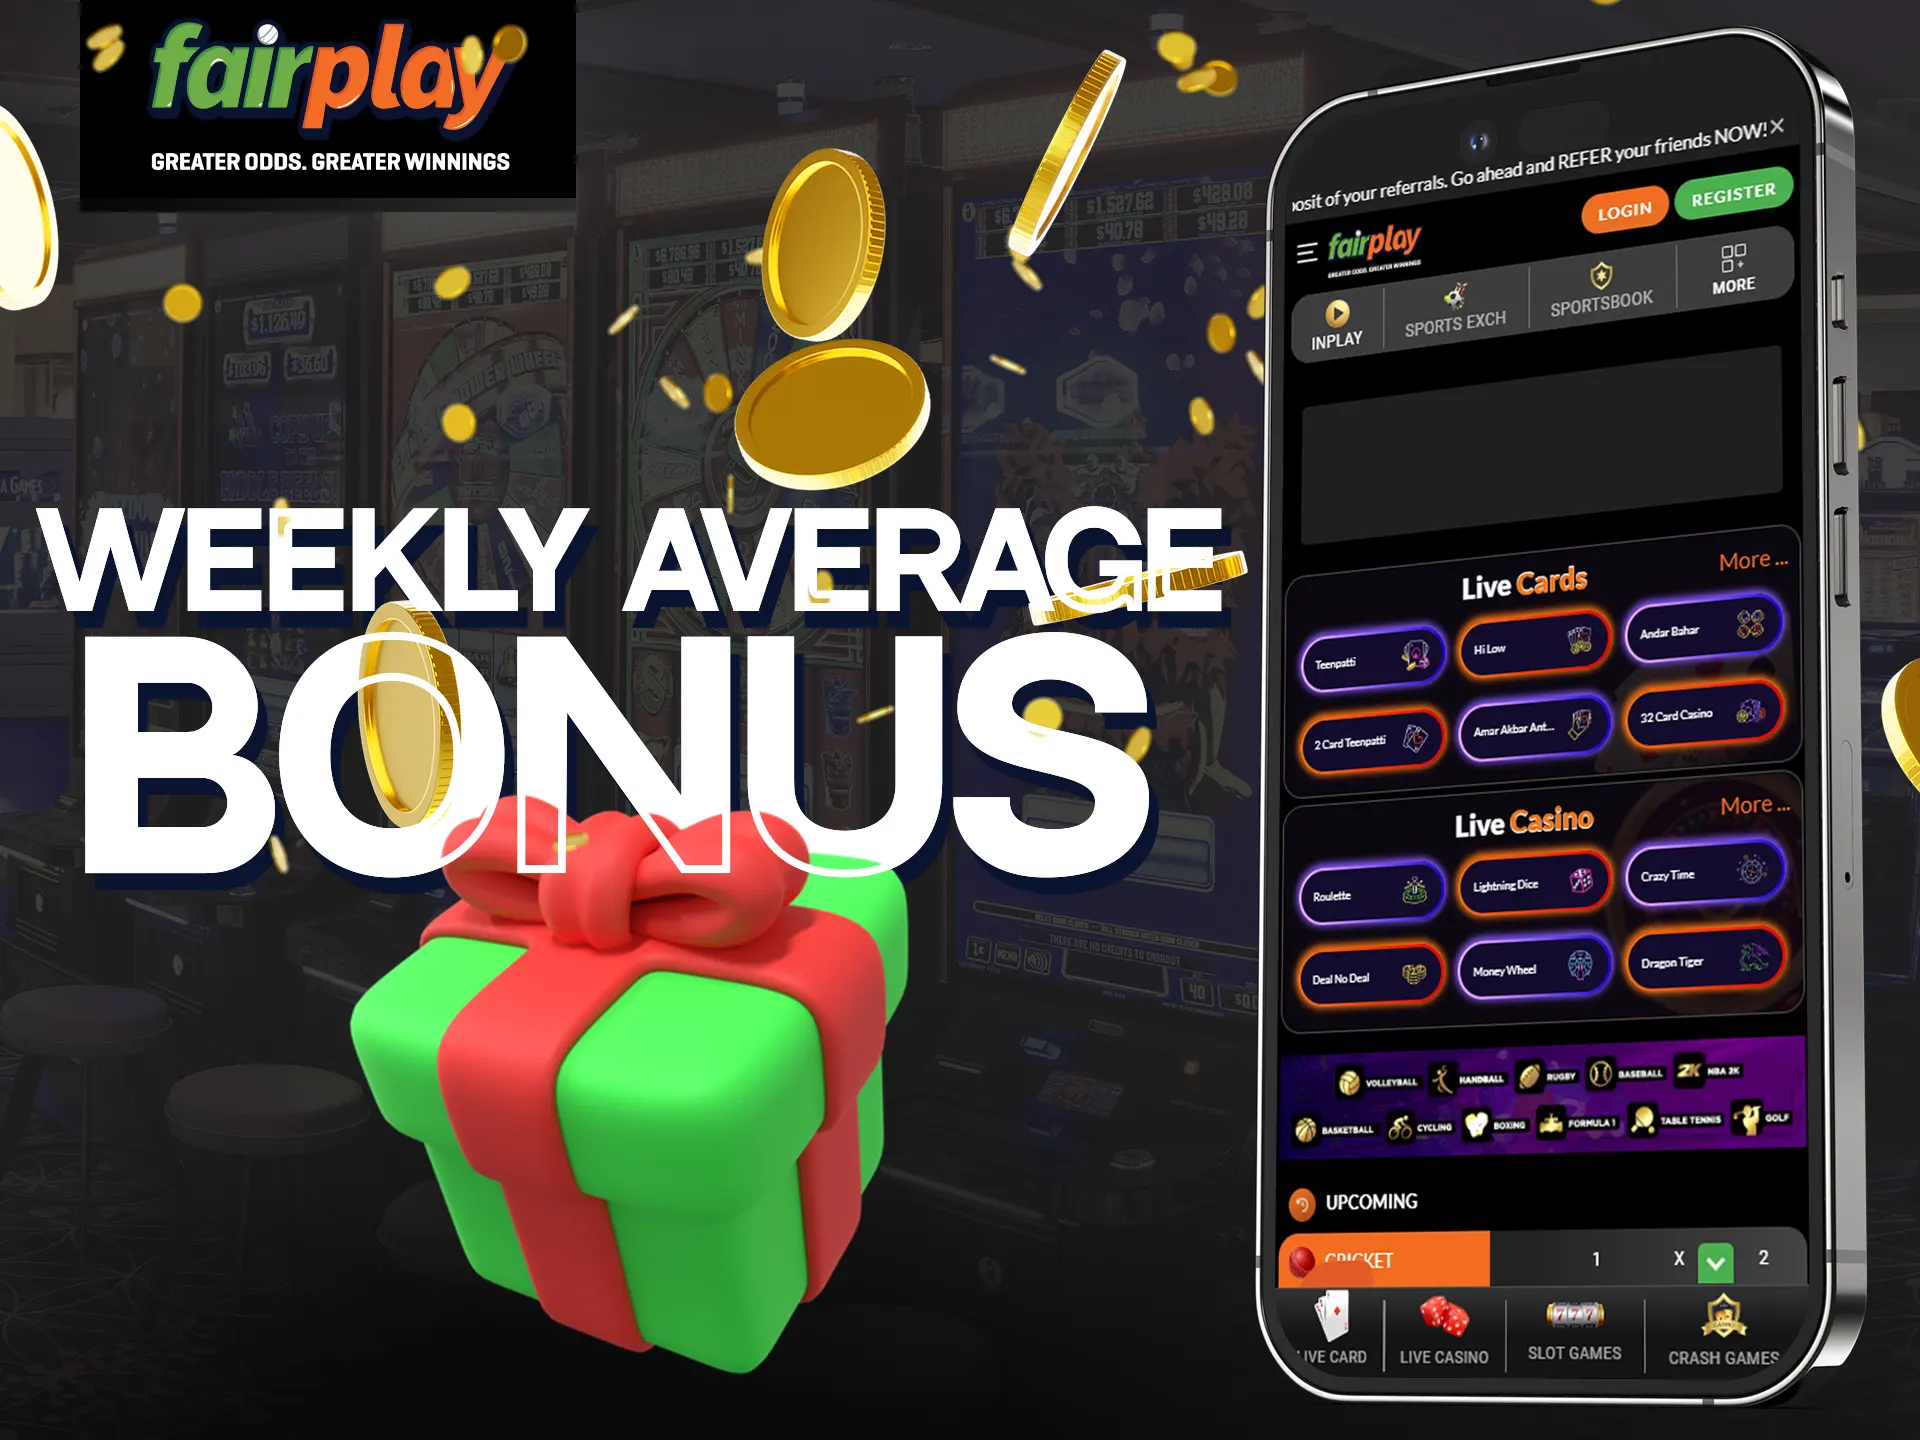 Get the 3 percent of your deposit back with weekly average bonus at Fairplay.